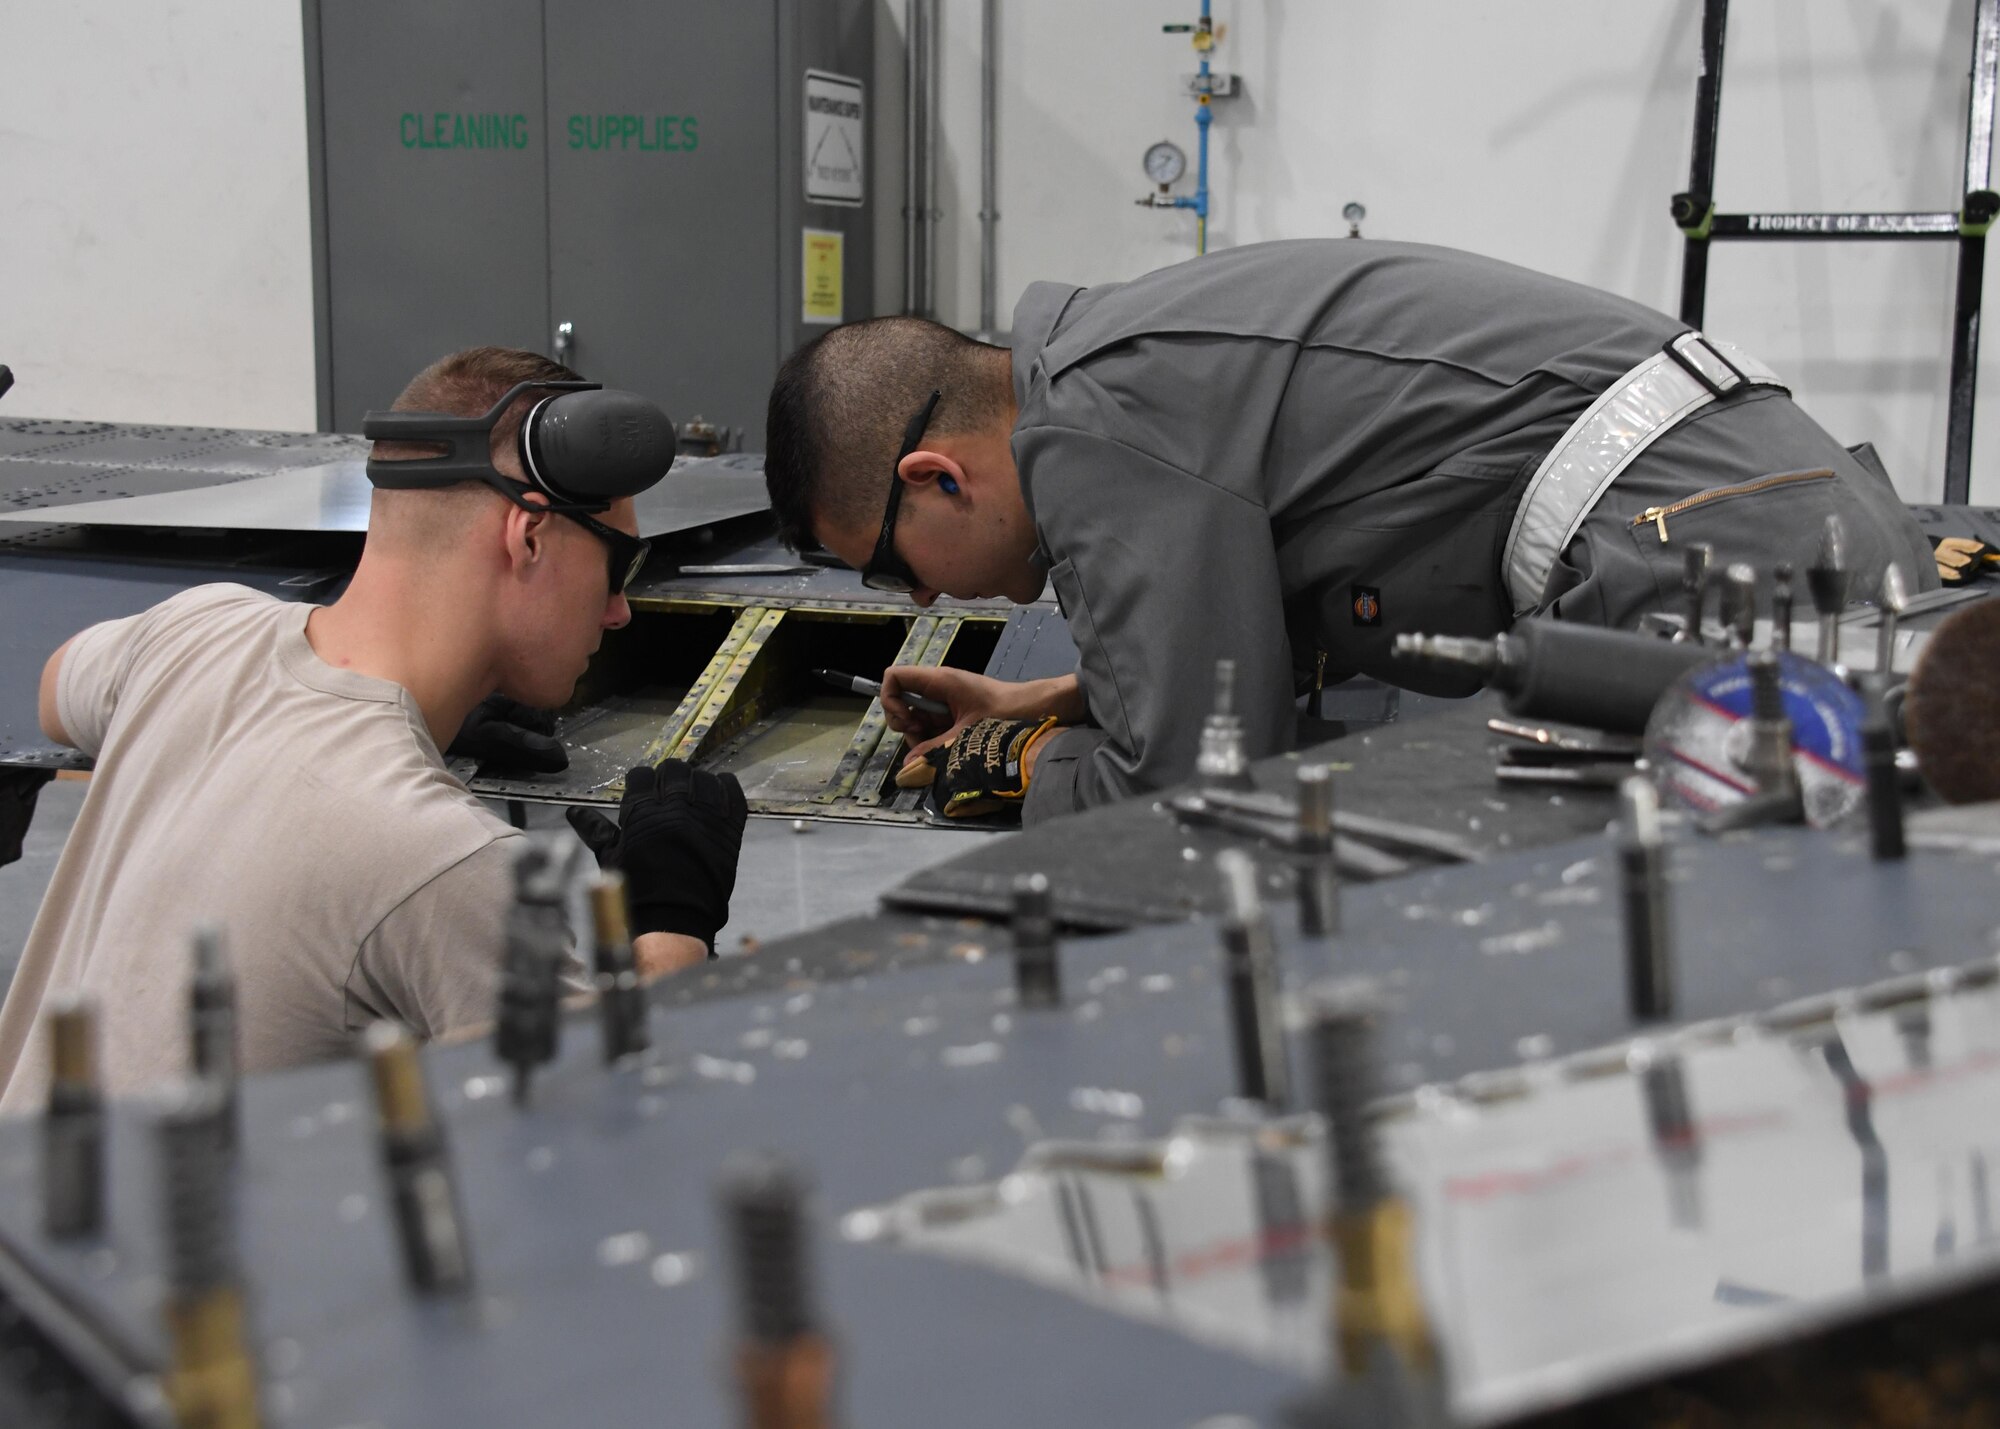 U.S. Air Force Airman 1st Class Levi Amell, left, and Senior Airman Wolfgang Kimsey, aircraft structural maintenance journeymen with the 379th Expeditionary Maintenance Squadron Sheet Metal Shop, take measurements for a replacement piece on an outbound flap for an aircraft at Al Udeid Air Base, Qatar, Feb. 16, 2017. In order to fabricate a new piece, the Airmen needed to measure the area to be replaced on the flap. (U.S. Air Force photo by Senior Airman Miles Wilson)